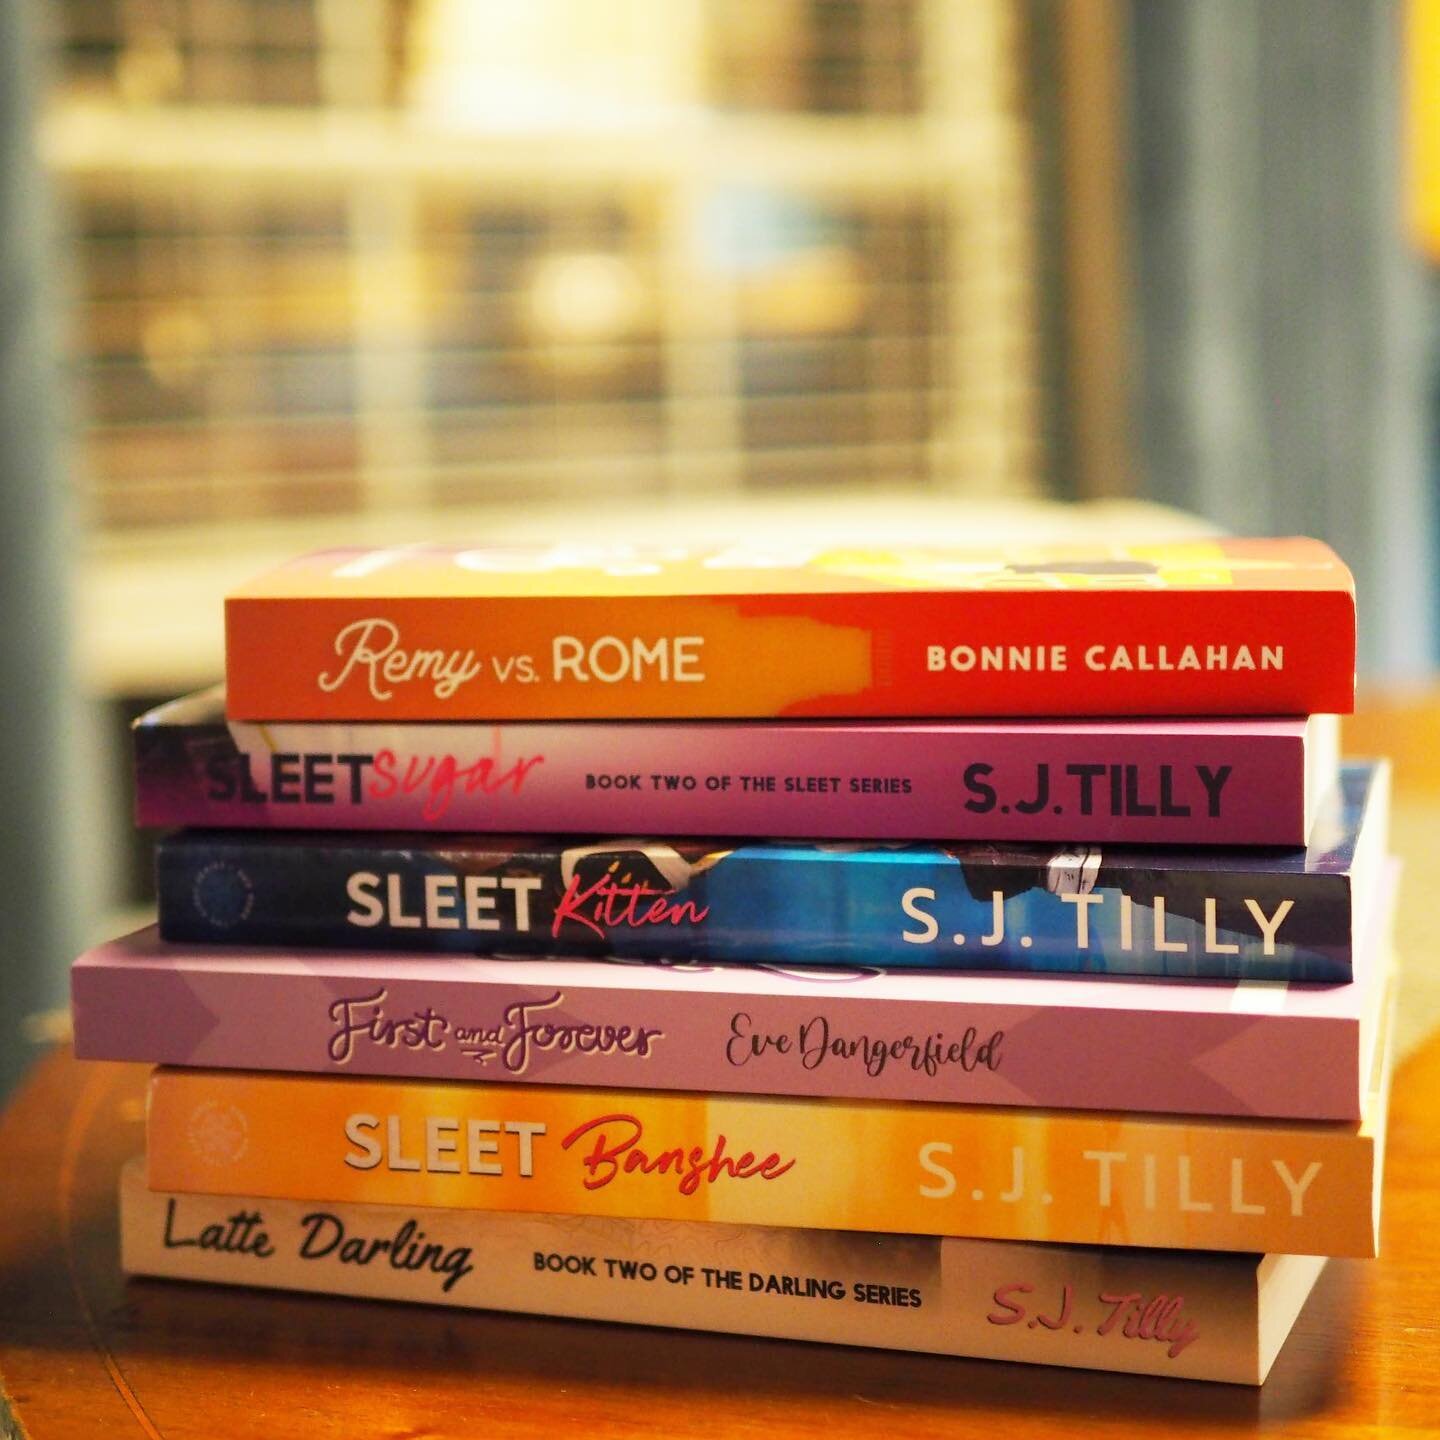 This stack of books has indeed been sitting on my dining room table for three months now. But that&rsquo;s okay because I think books make the best decorations. 

Do you agree? Are book stacks the best decor? What about just stacking them up in a pil